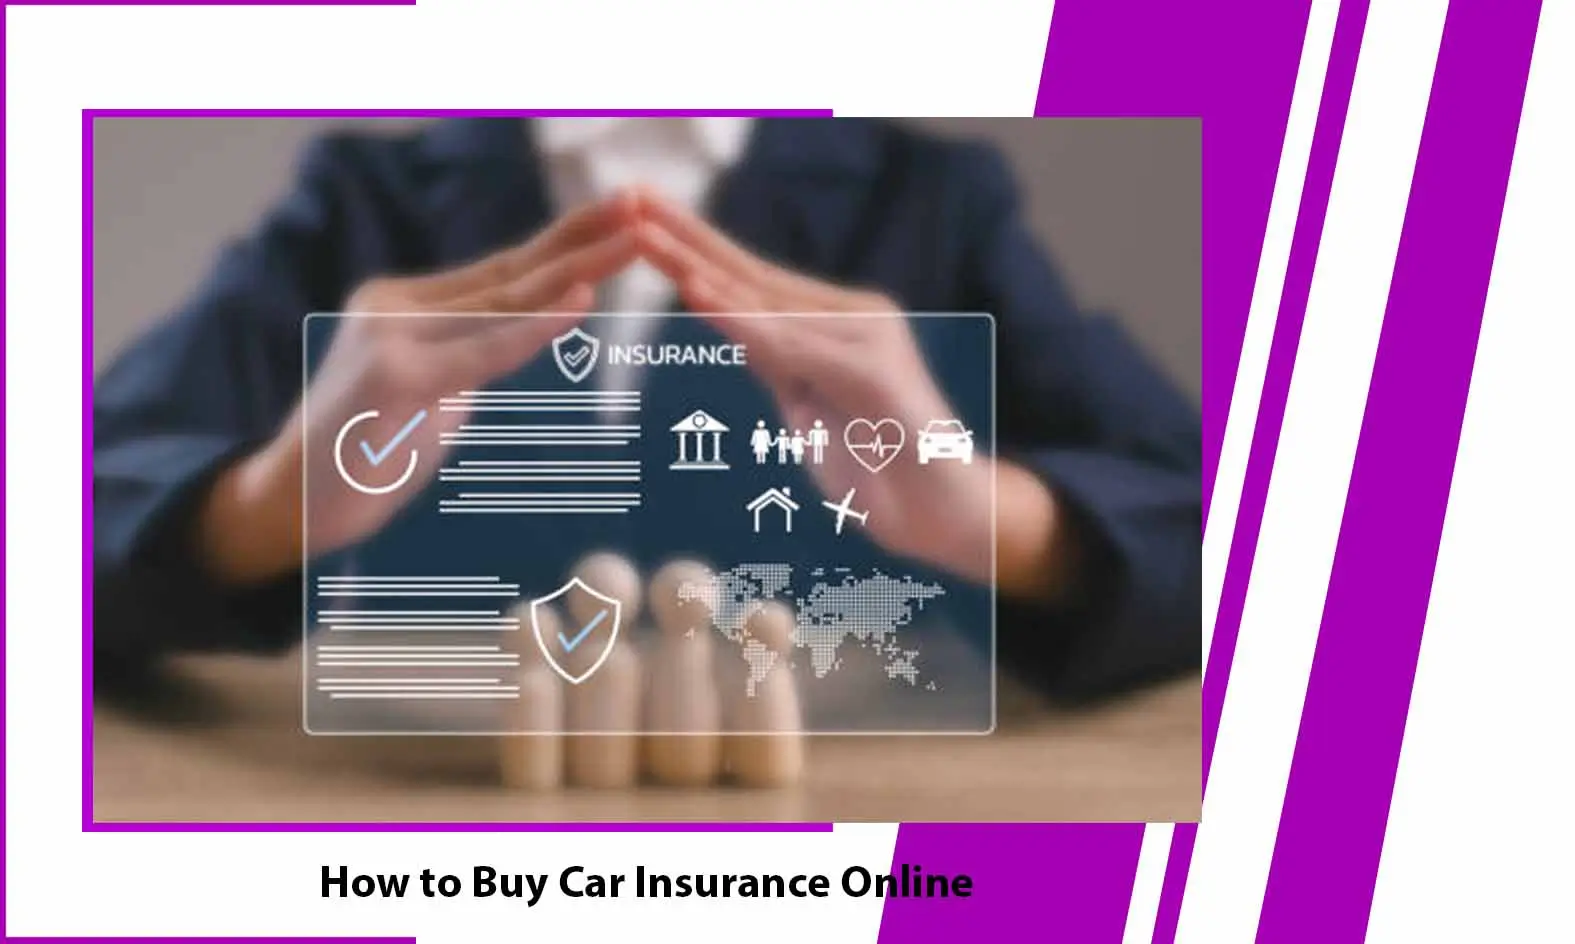 How to Buy Car Insurance Online